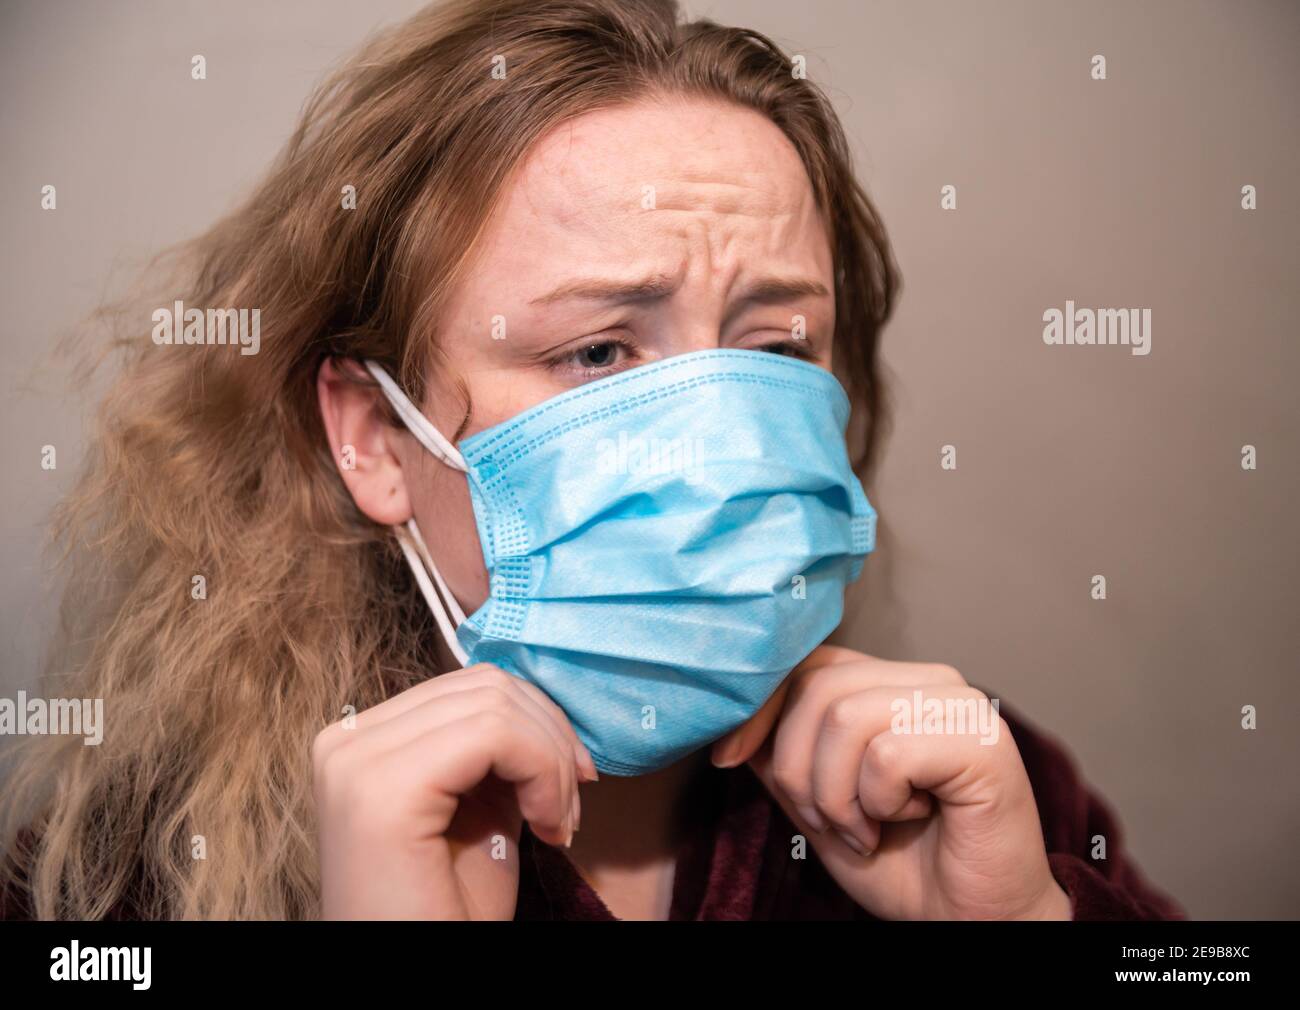 White woman wearing double face masks for covid prevention, blonde hair, front view Stock Photo